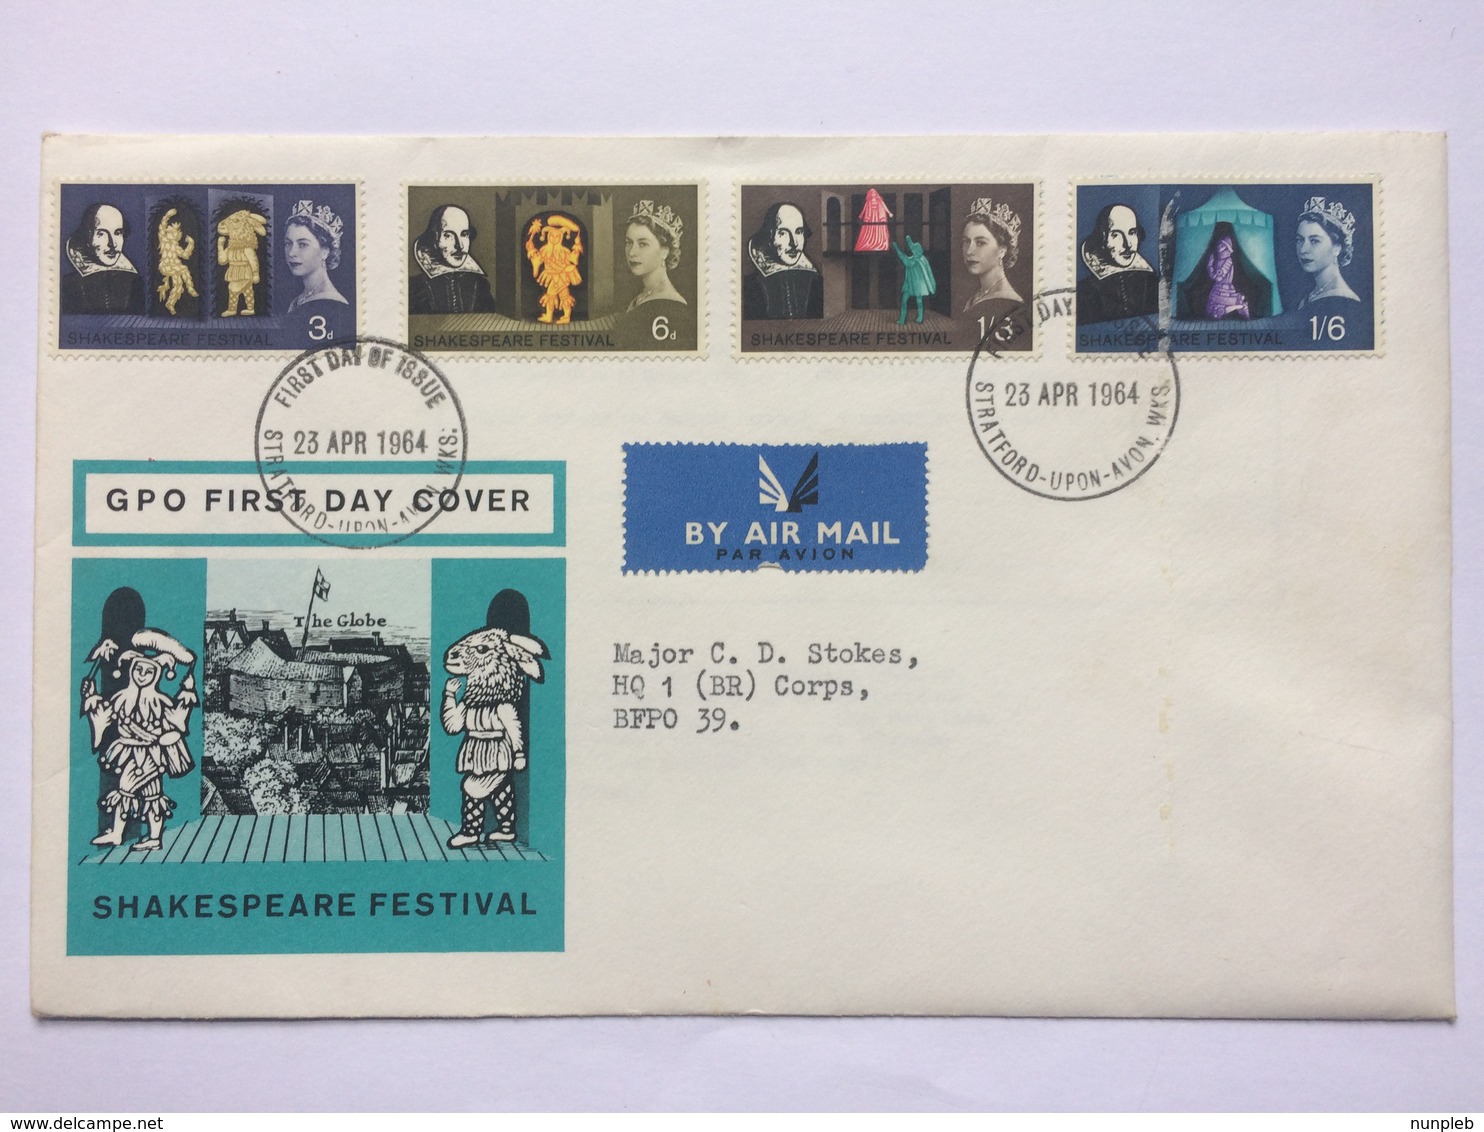 GB 1964 Shakespeare Festival FDC - Stratford Postmark - Air Mail To BFPO 39 - Covers & Documents